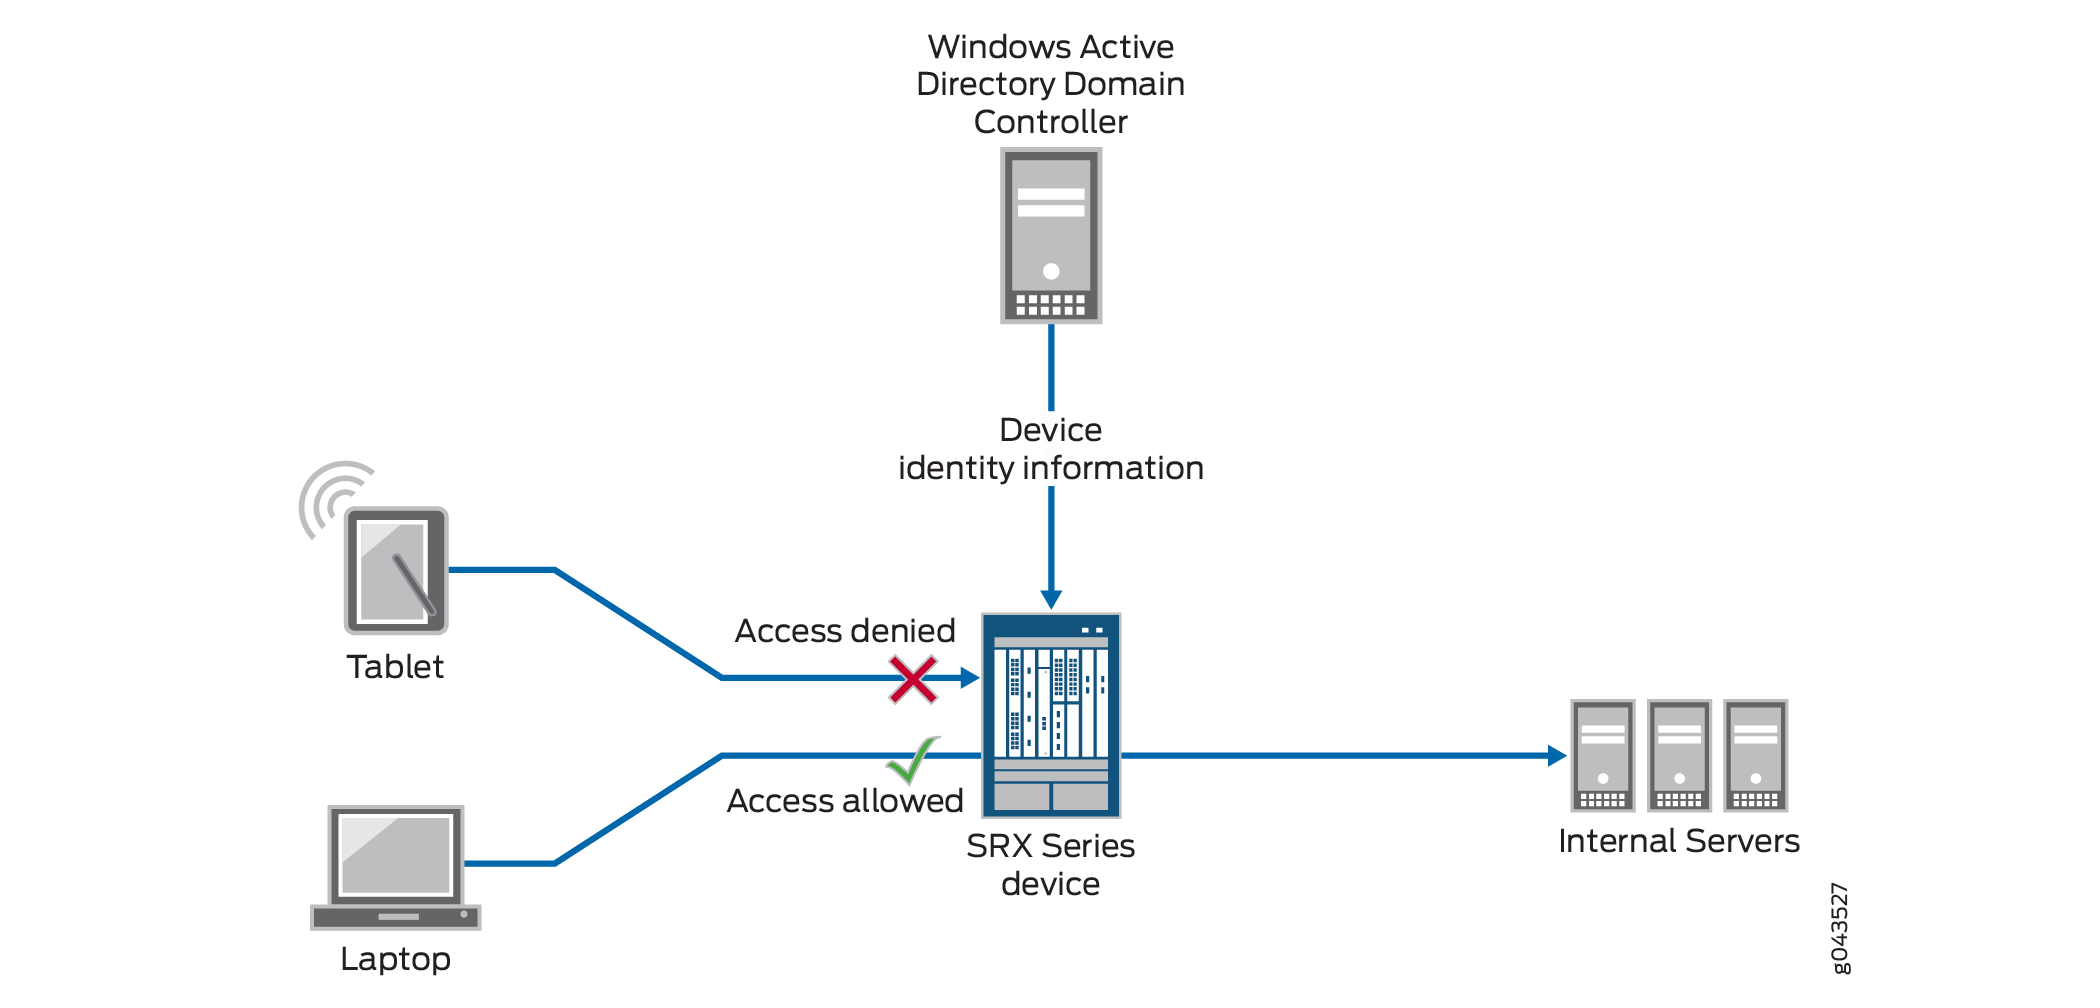 Topology for the Device Identity Feature with Active Directory as the Authentication Source